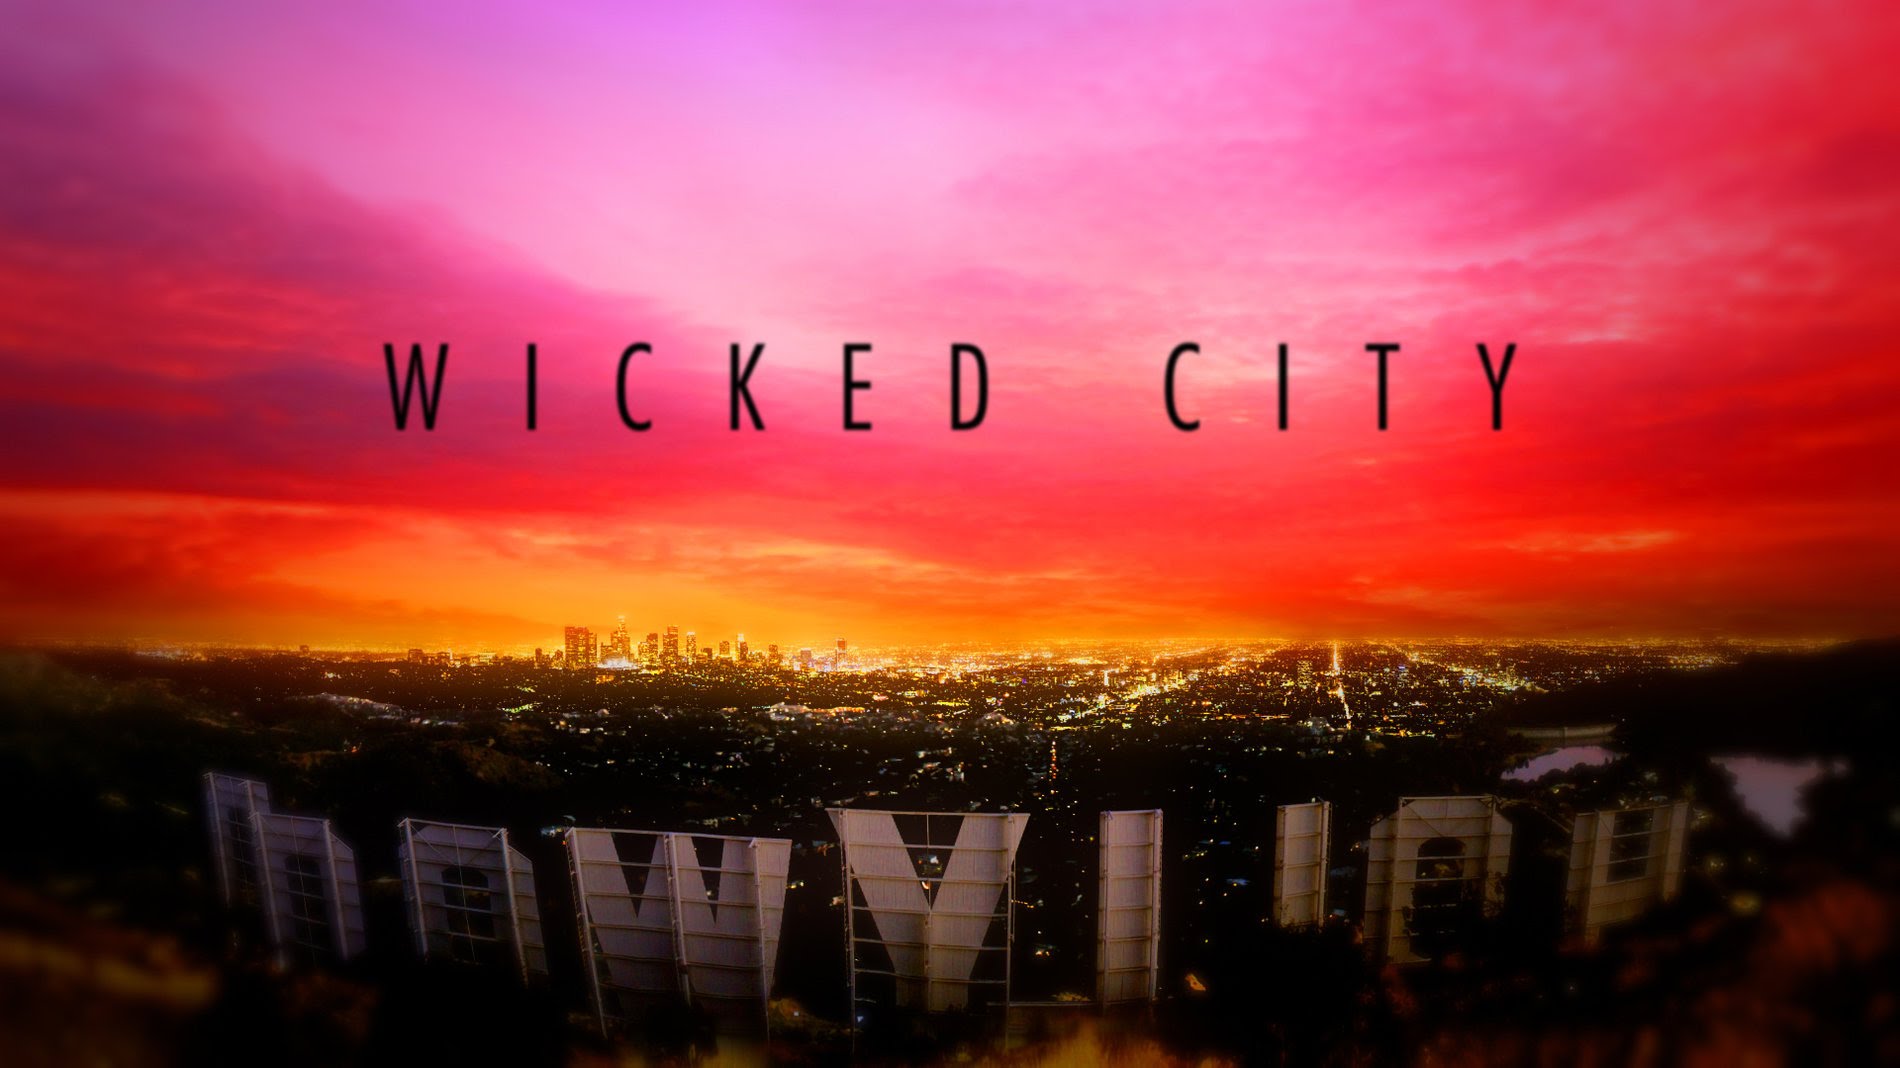 wicked city title